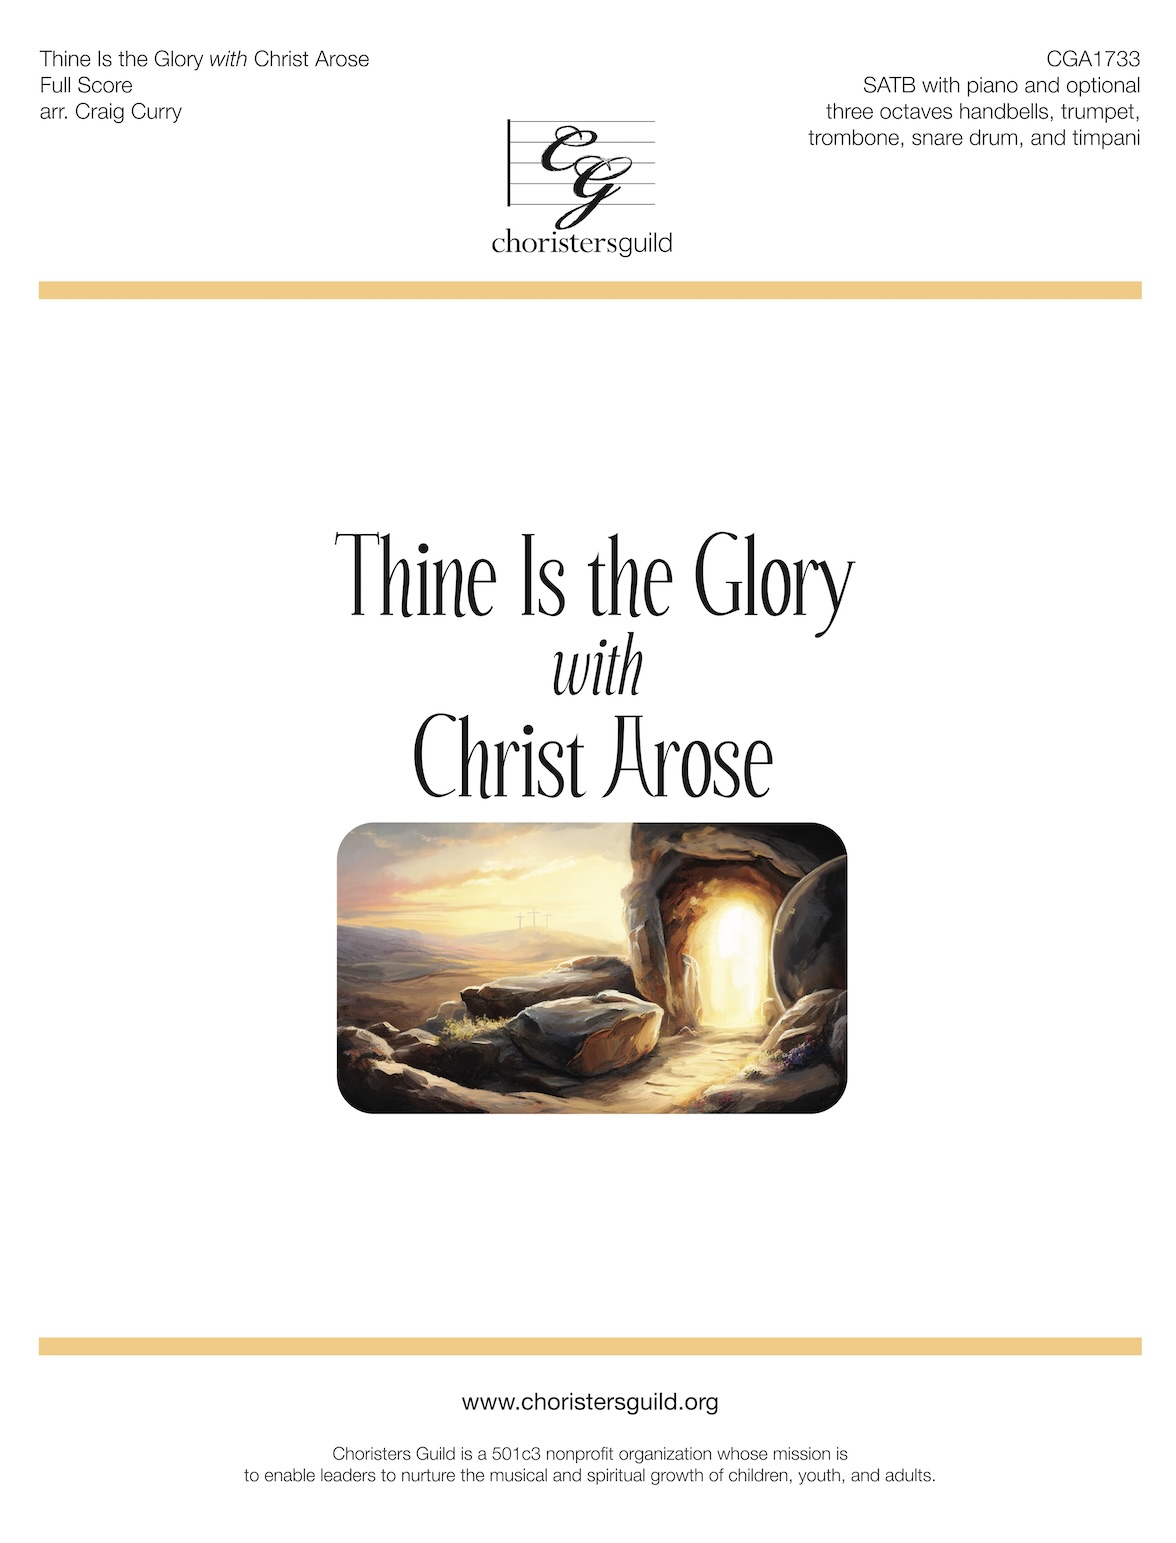 Thine Is the Glory (with Christ Arose) - Full Score and Reproducible 